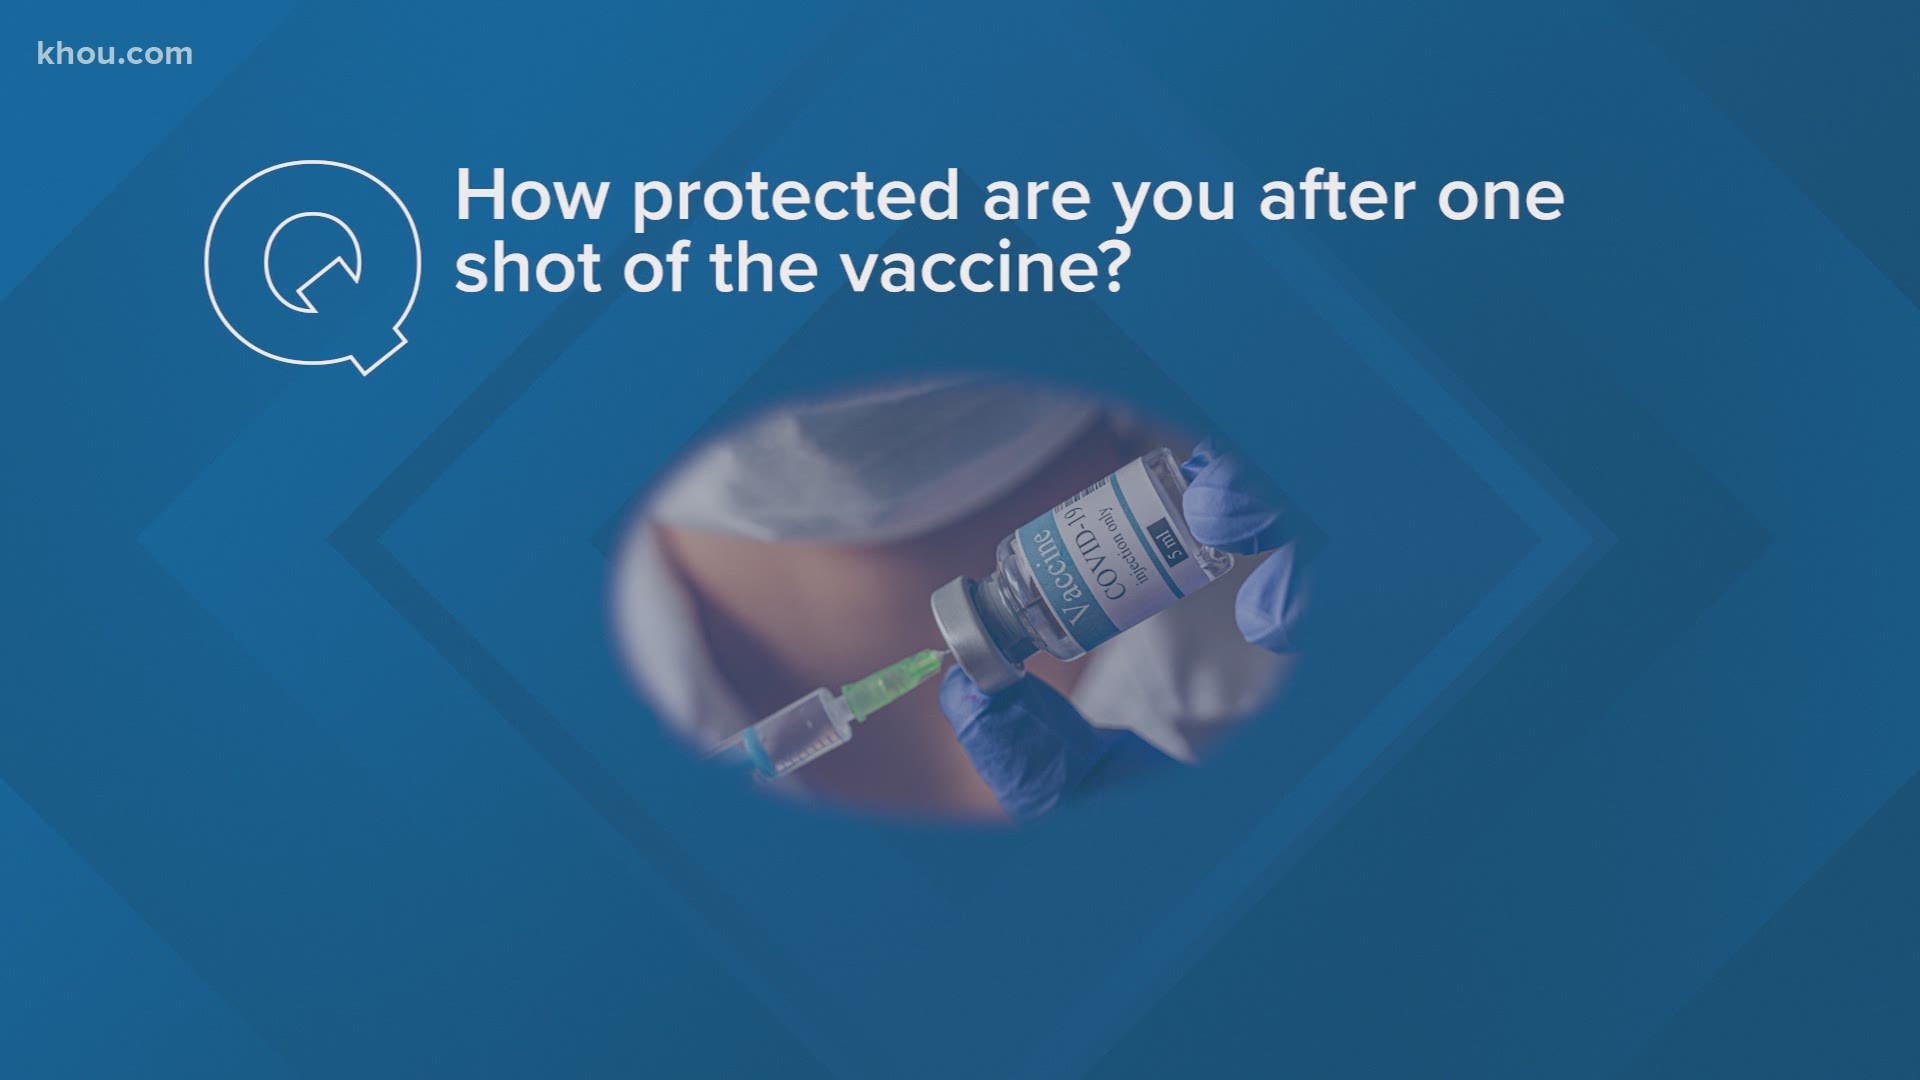 A viewer wanted to know how protected are you after one shot of the vaccine and when after the shot do you become protected?